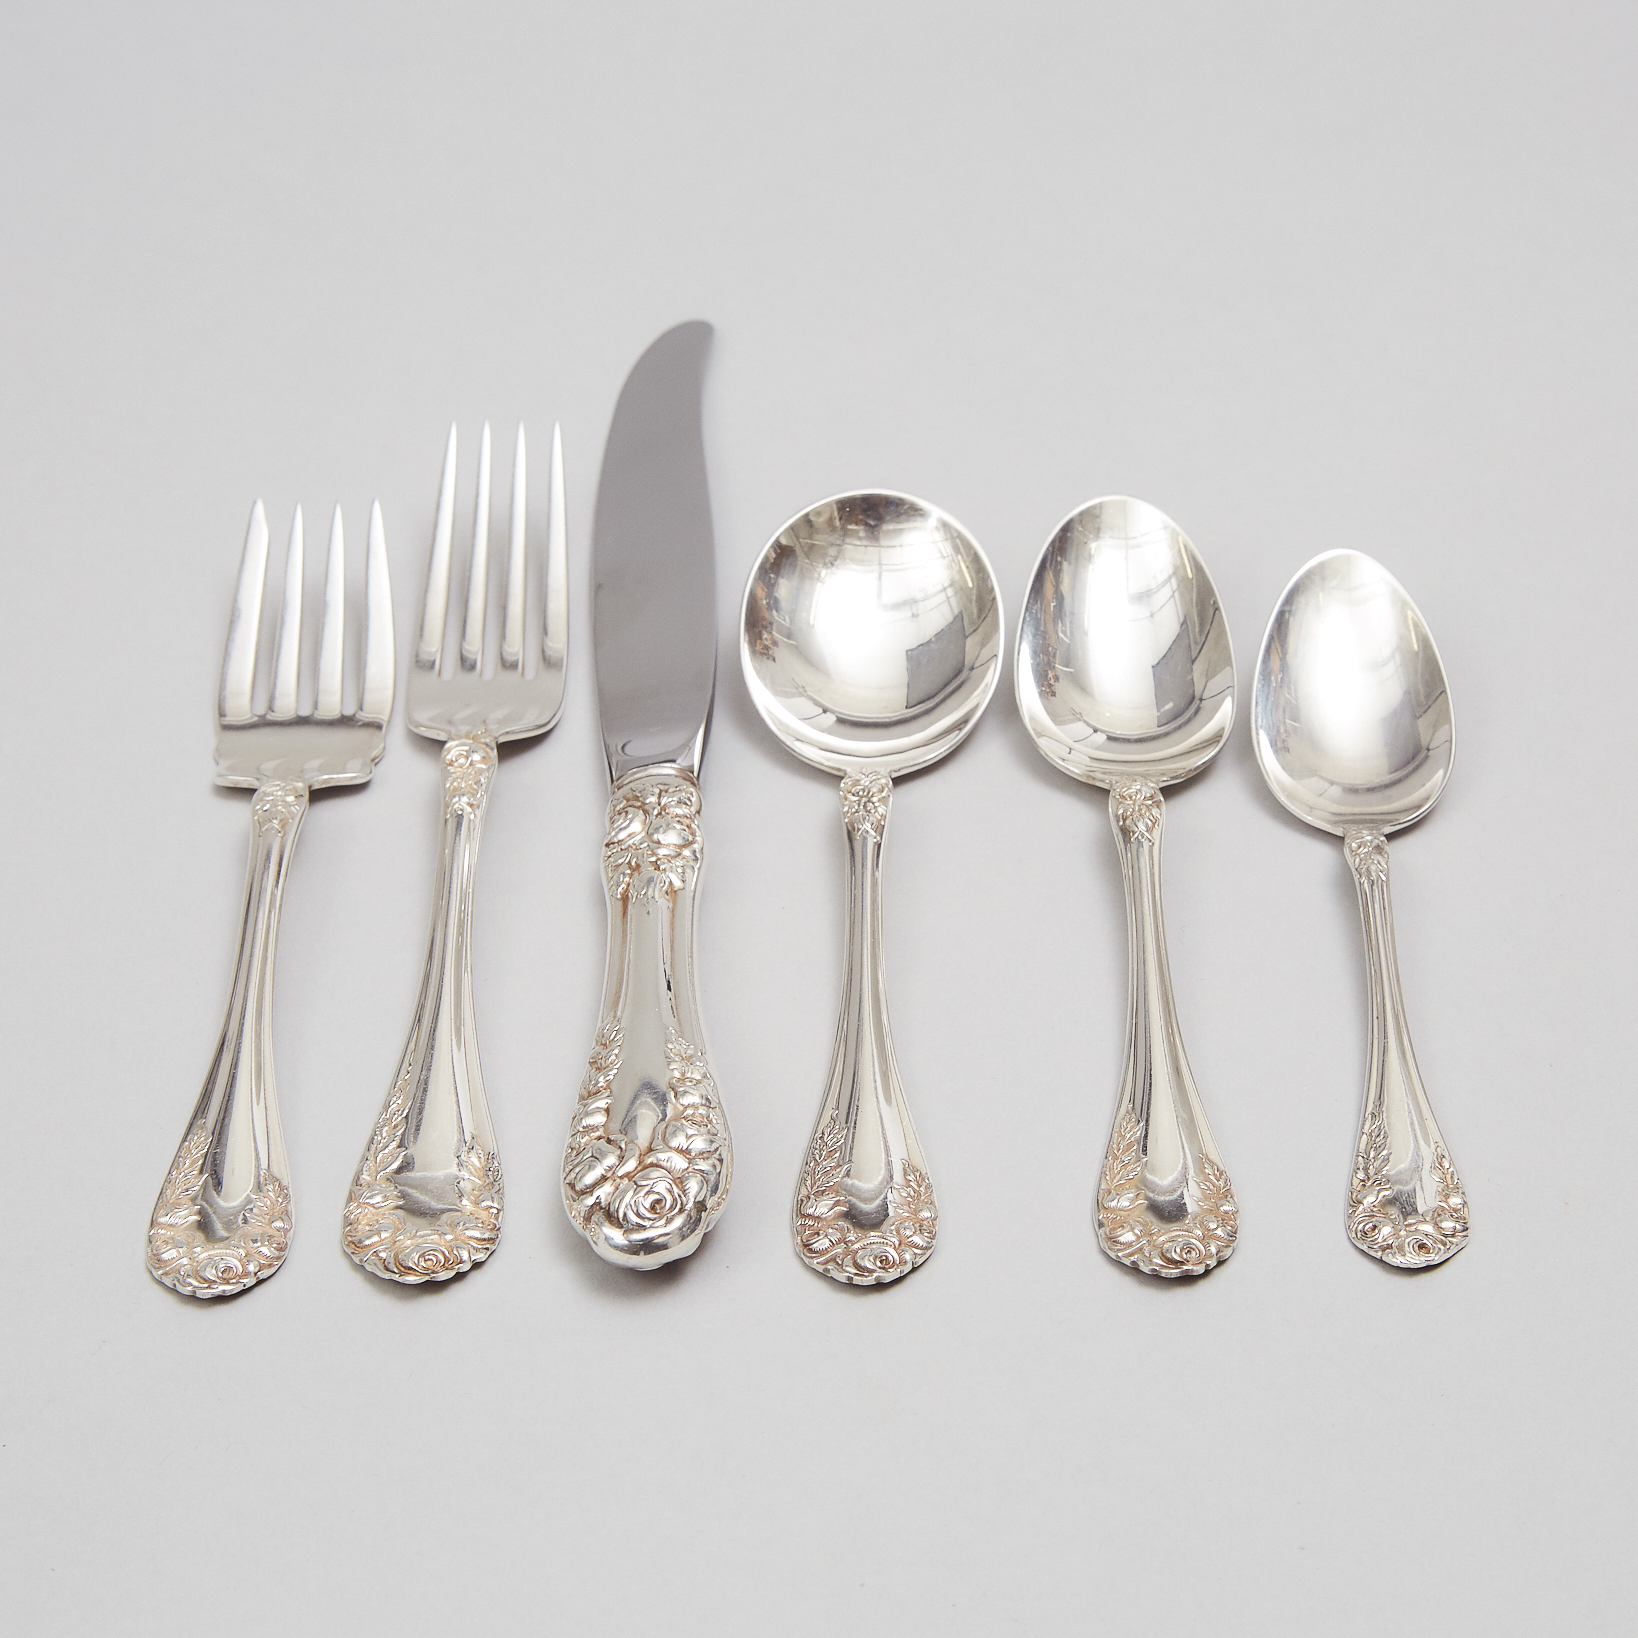 American Silver 'Normandy Rose' Pattern Flatware Service, Northumbria Silver Co., 20h century